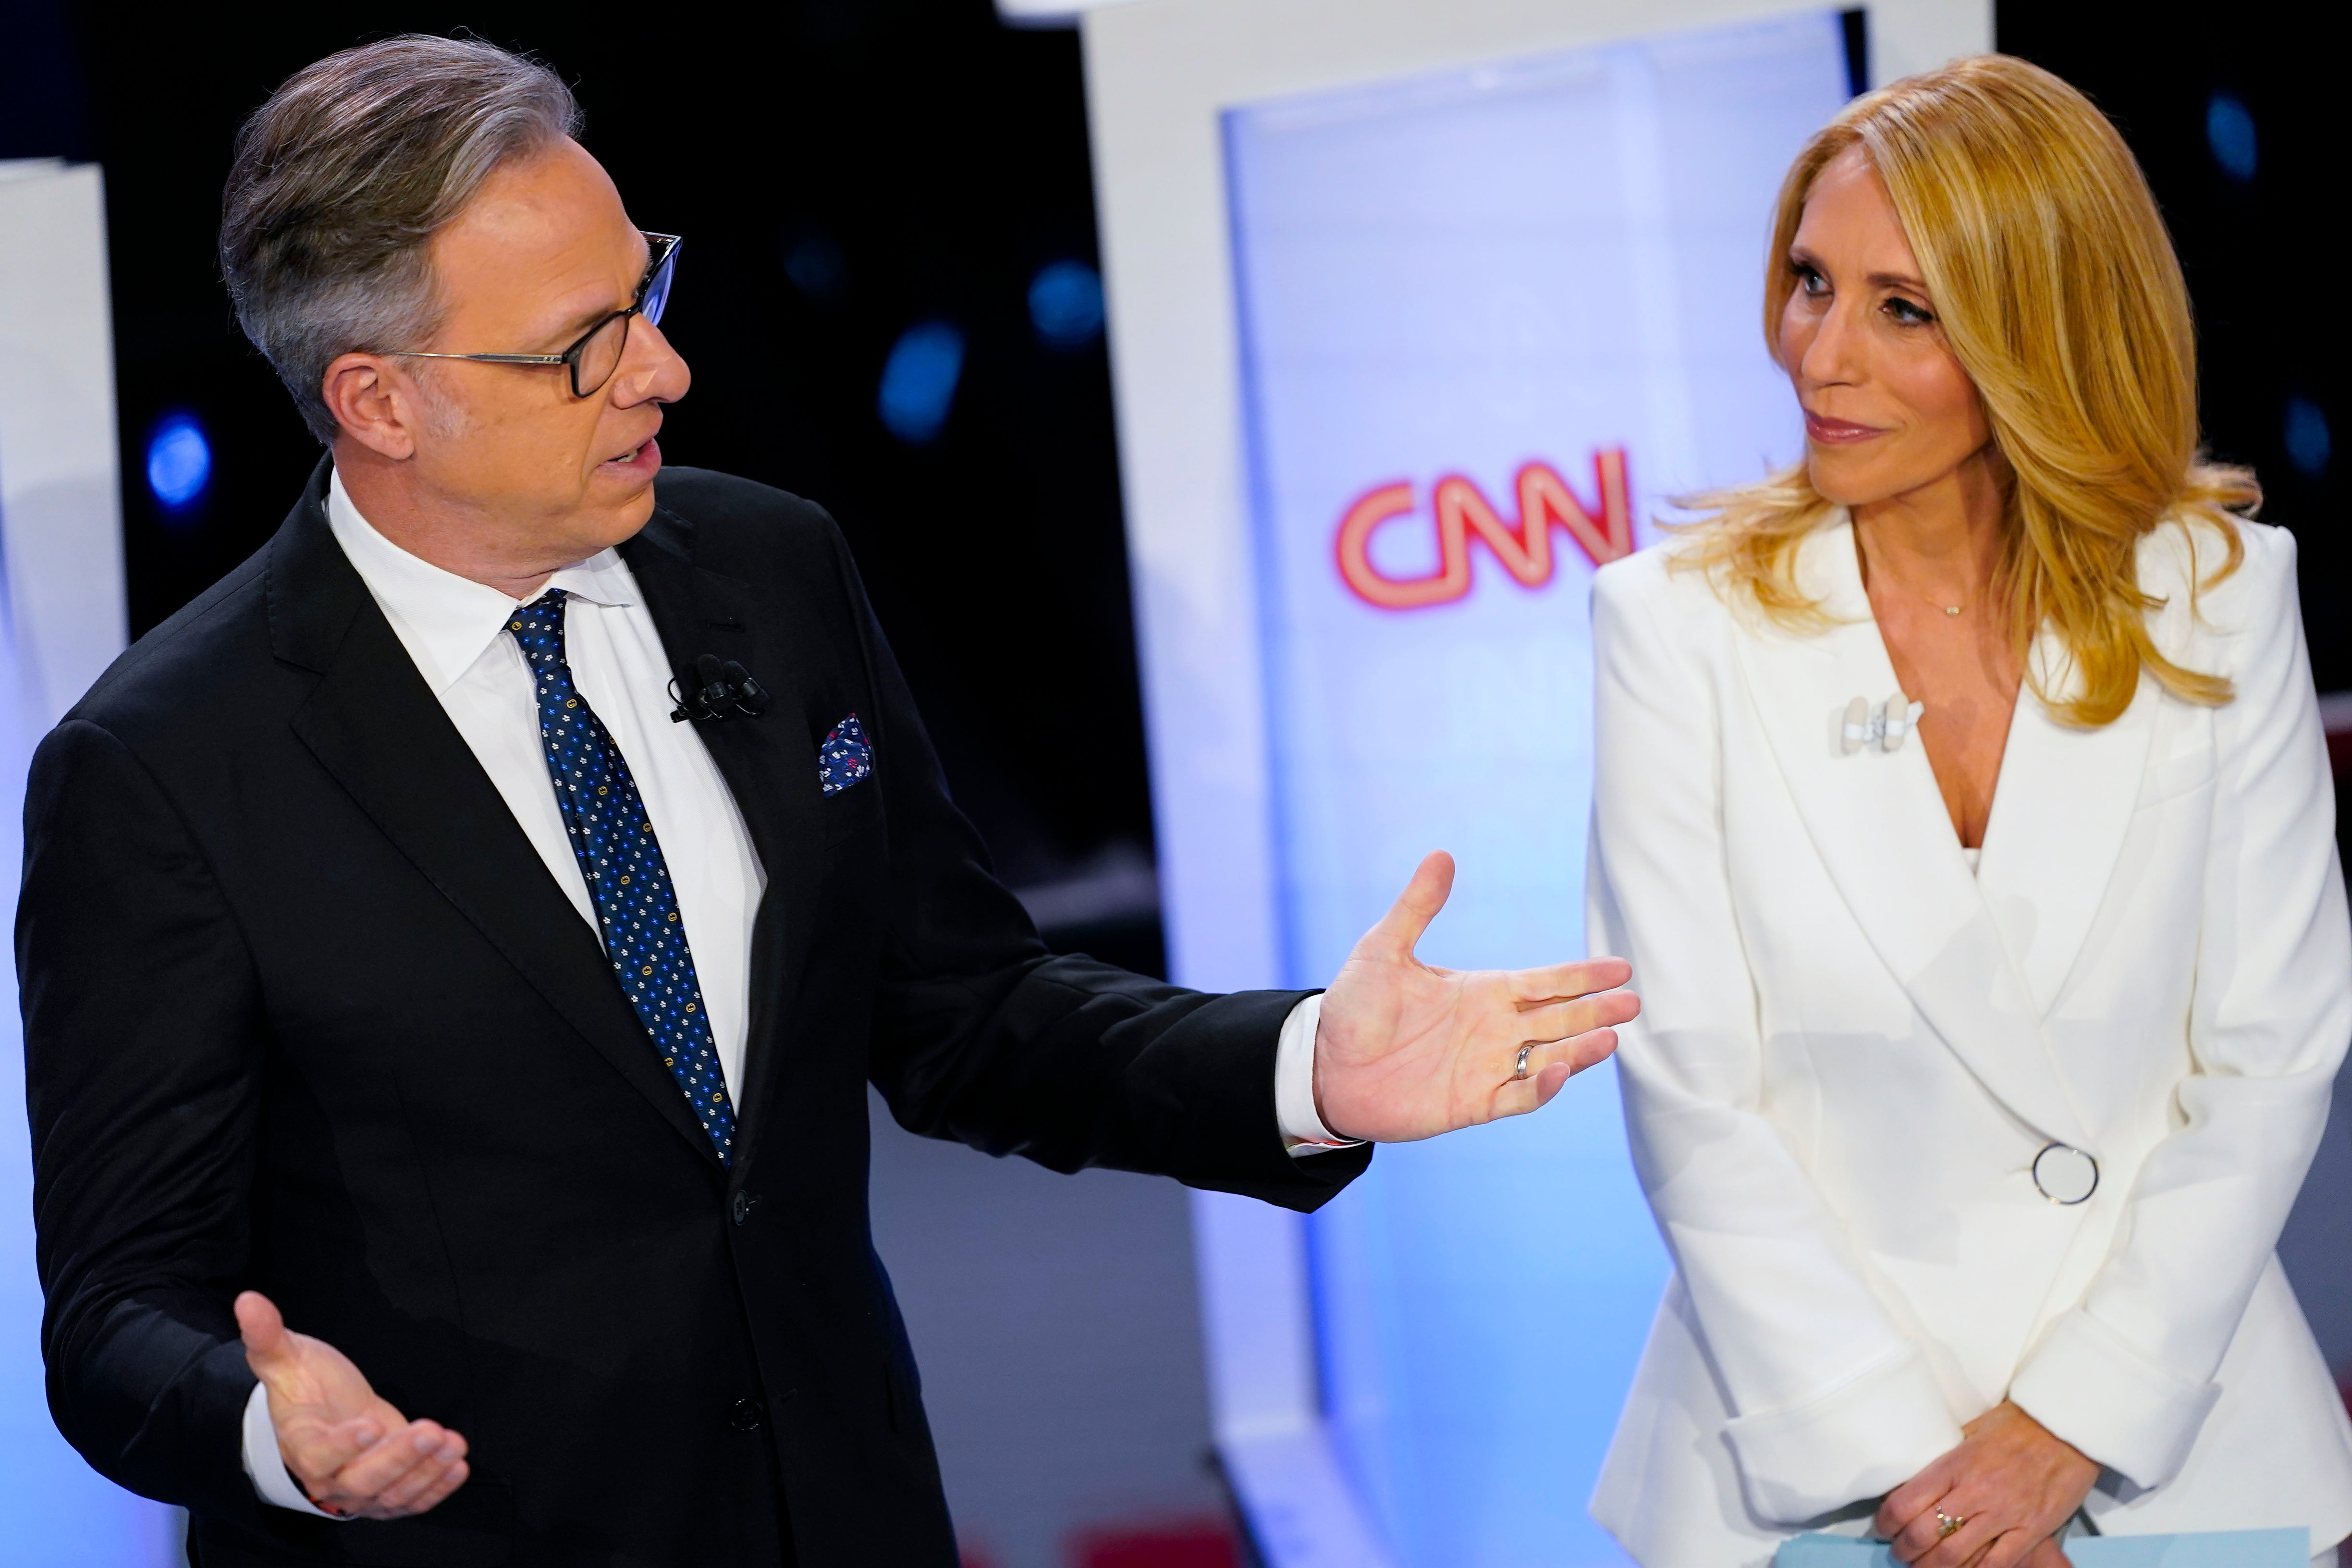 Moderators Jake Tapper and Dana Bash and Tapper were criticized online for offering no pushback during the debate and instead giving a “thank you” to each candidate after answers